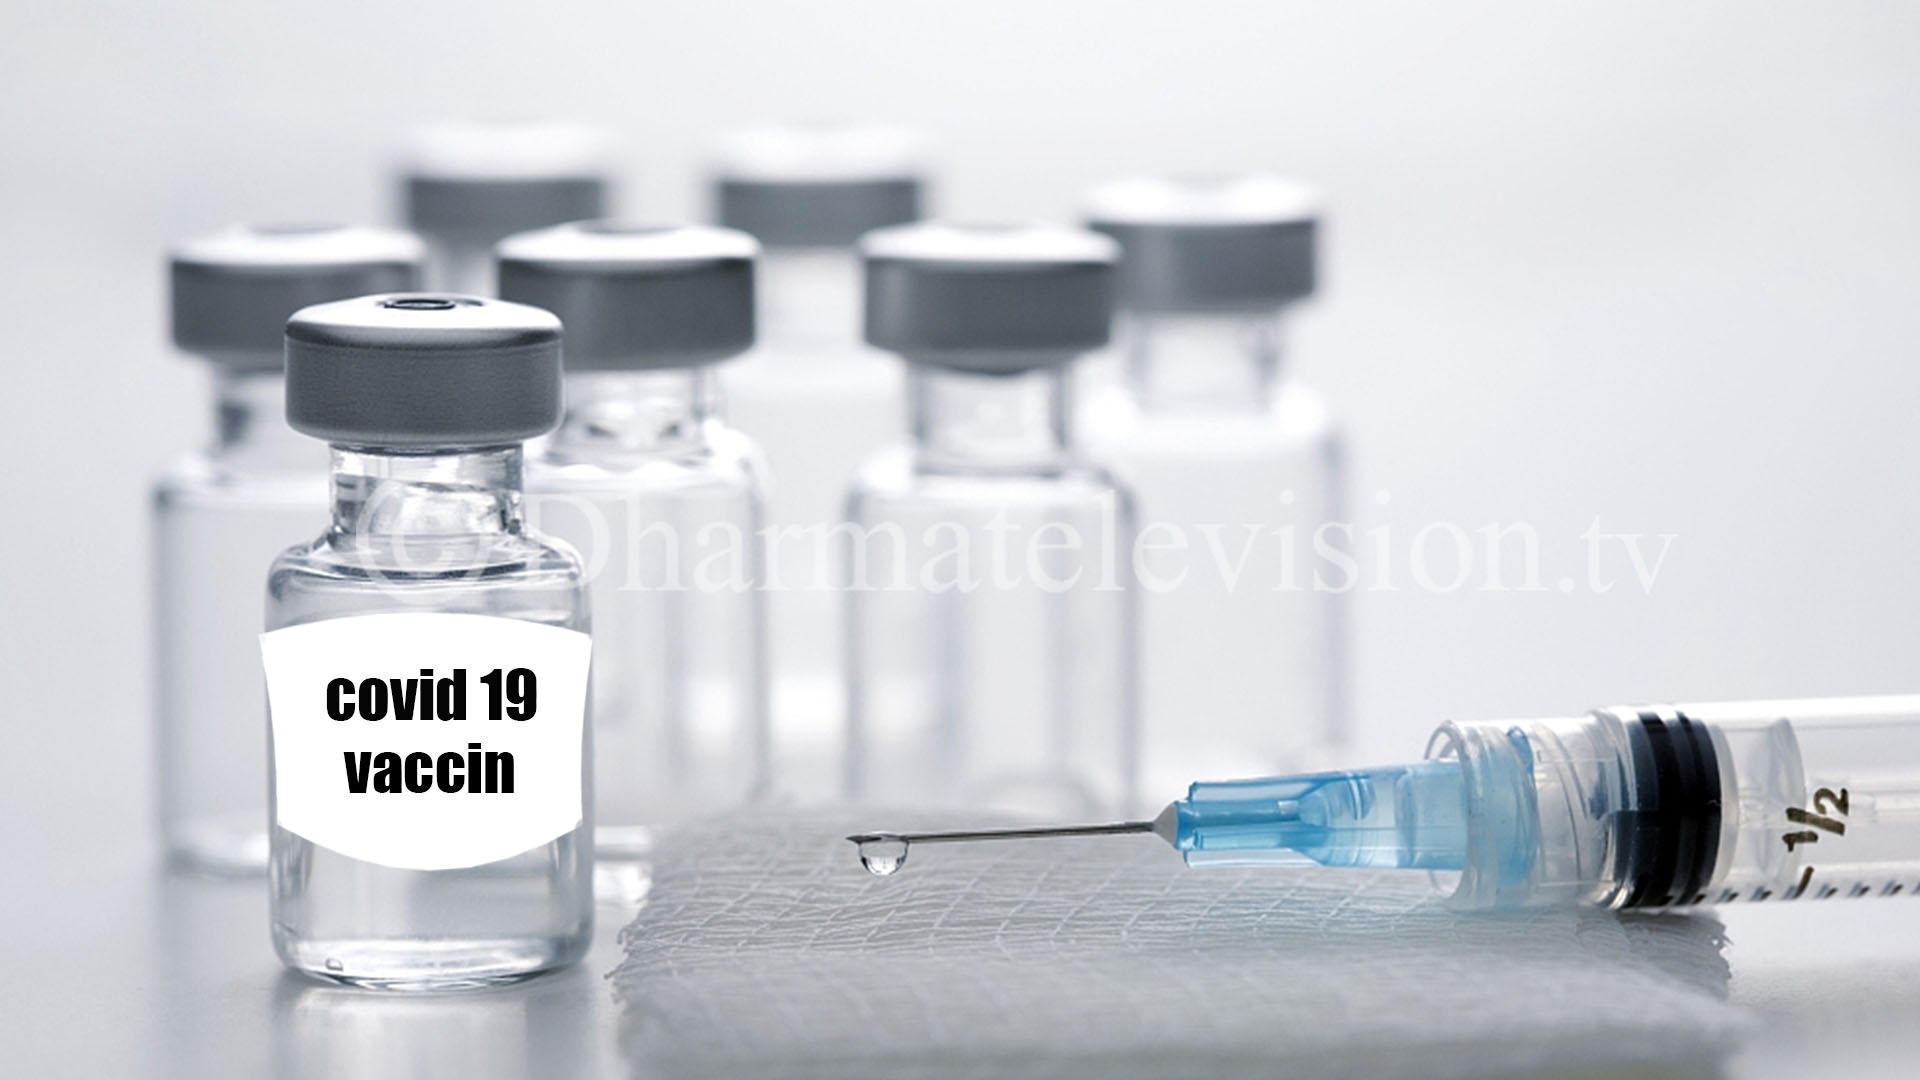 Covid-19 vaccine. On the way? Maybe not yet